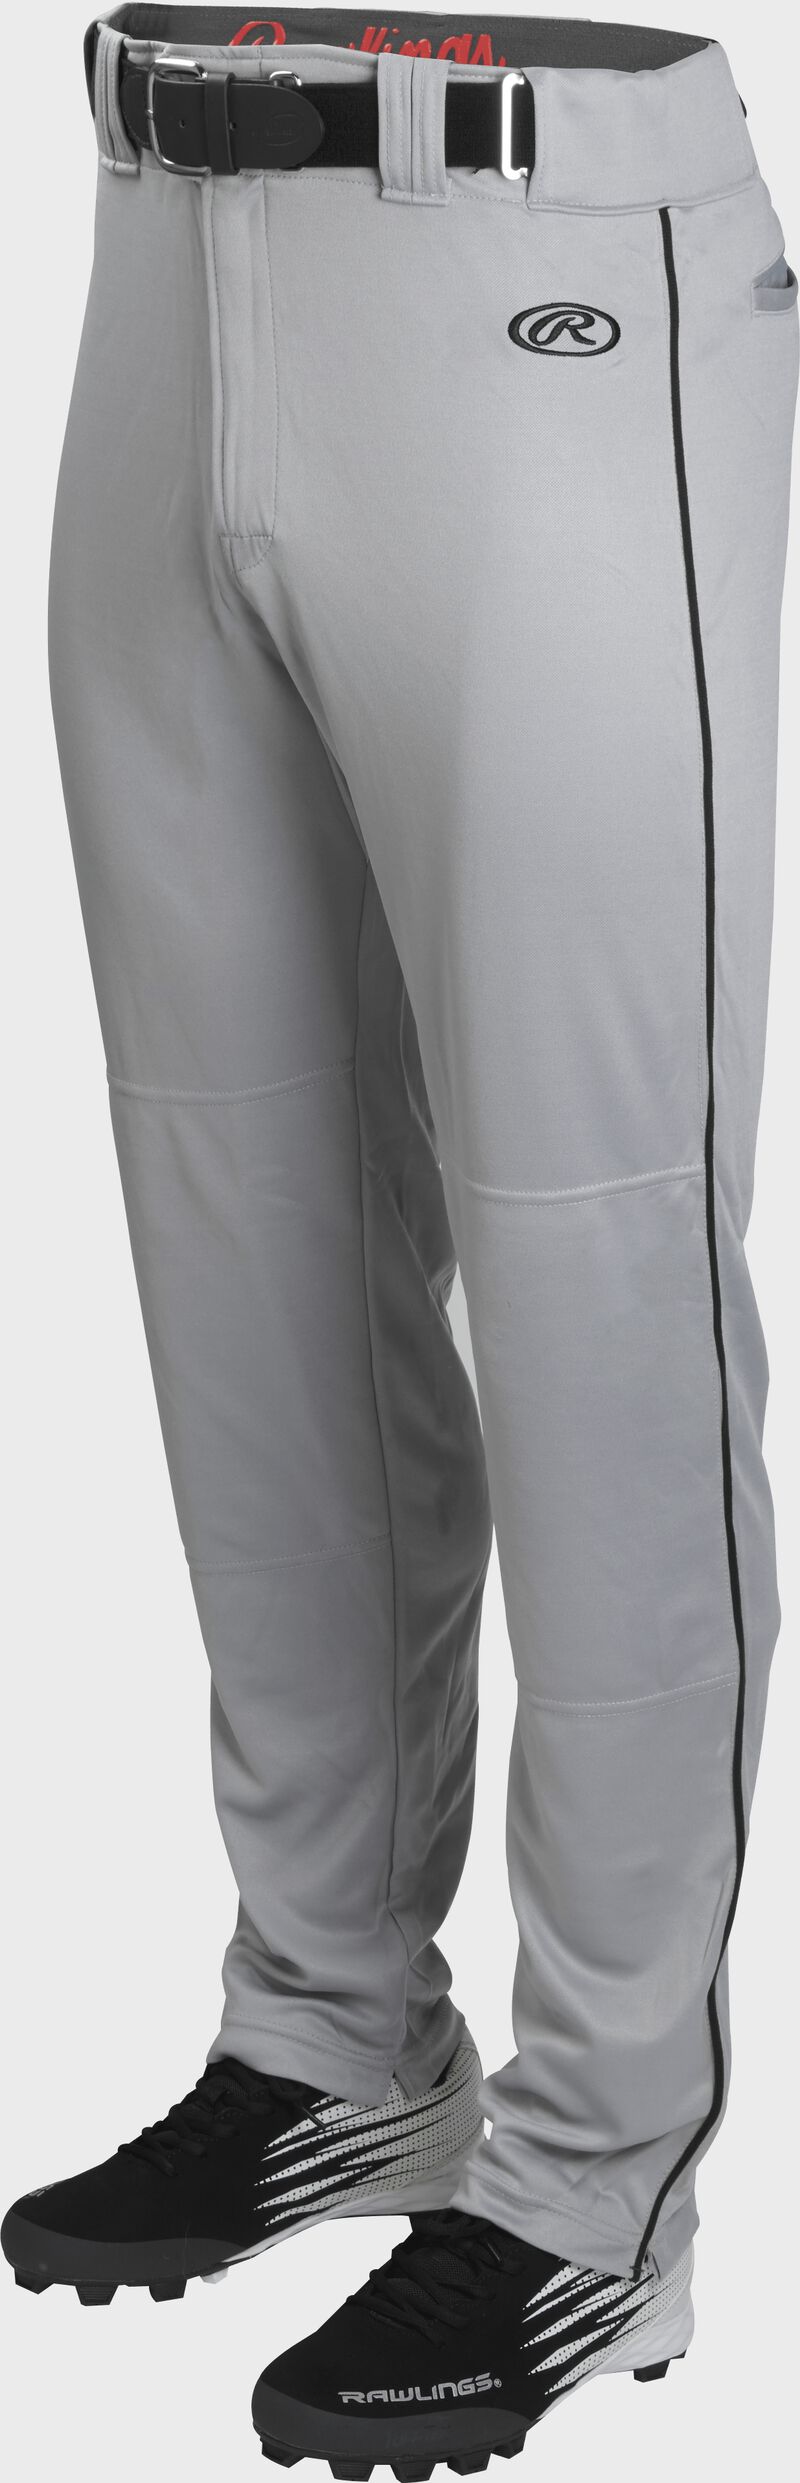 LOUISVILLE STOCK PANT WITH PIPING JR GREY - Sports Trans-Action